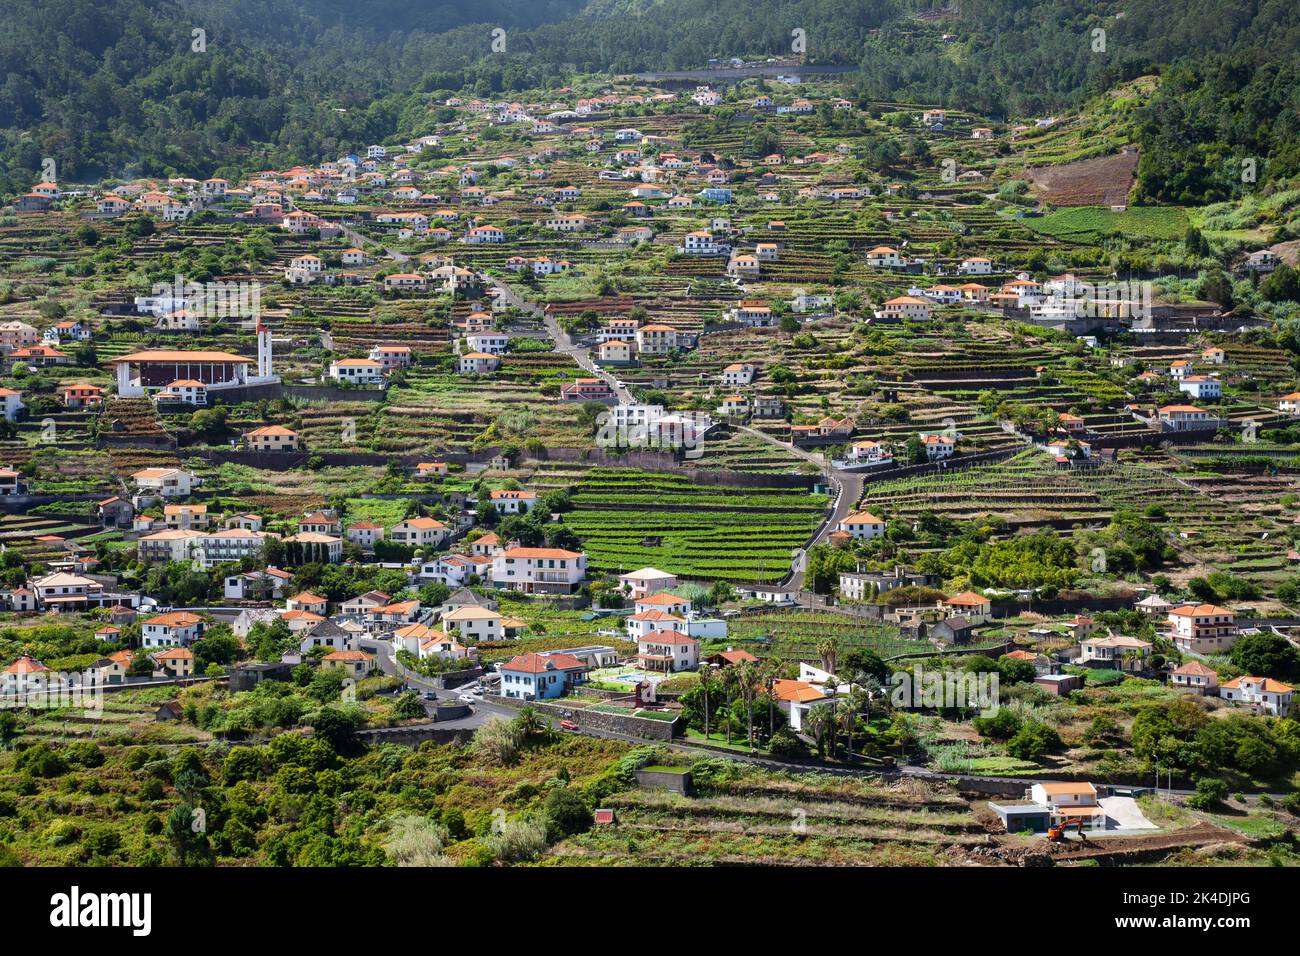 View of the picturesque village of Sao Vicente,  Madeira,  Portugal,  Europe Stock Photo